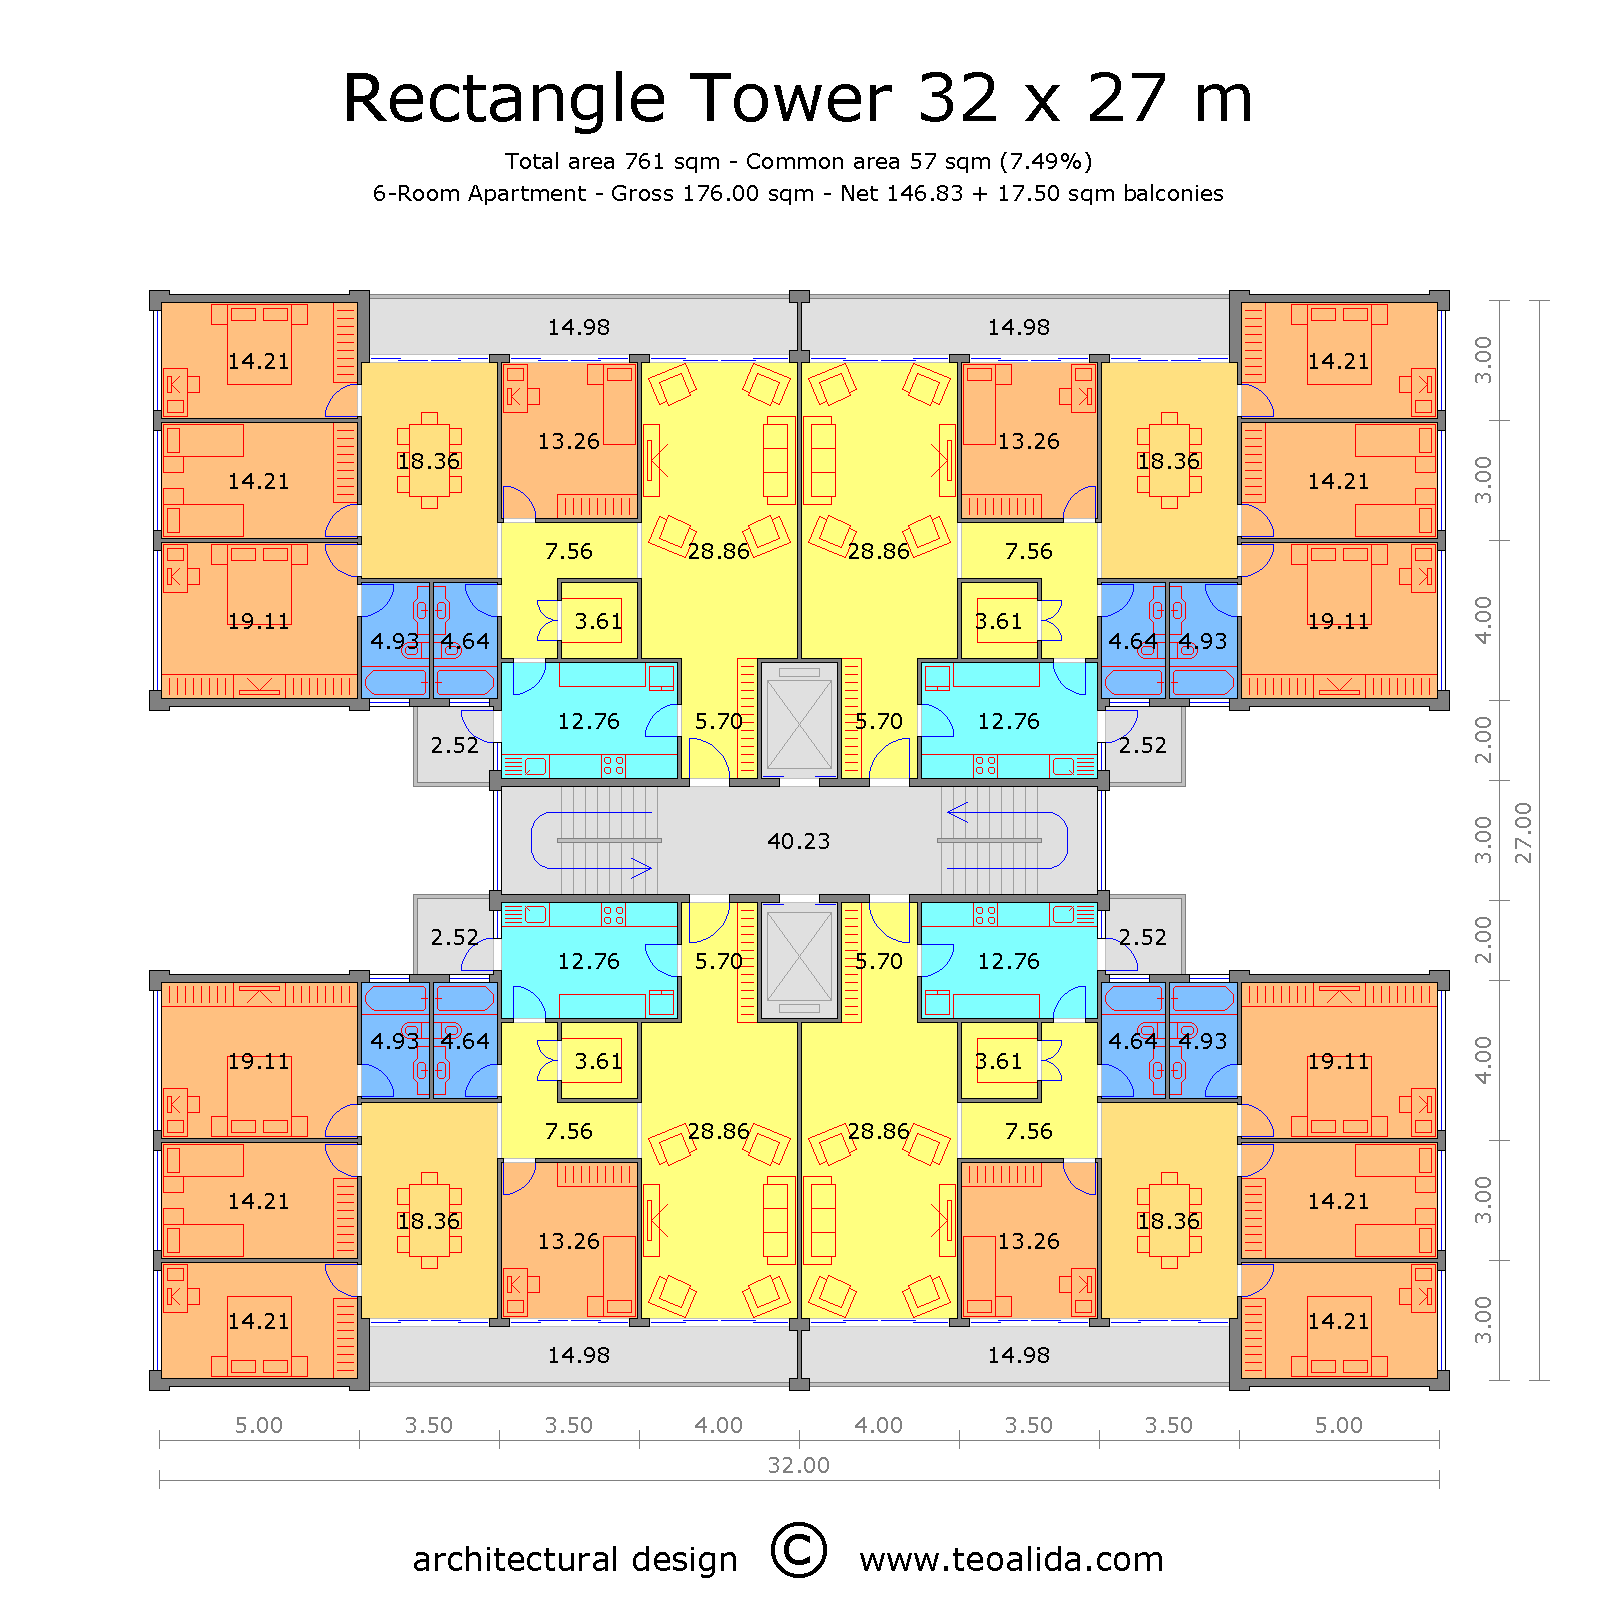 Rectangle tower with 6-room apartments